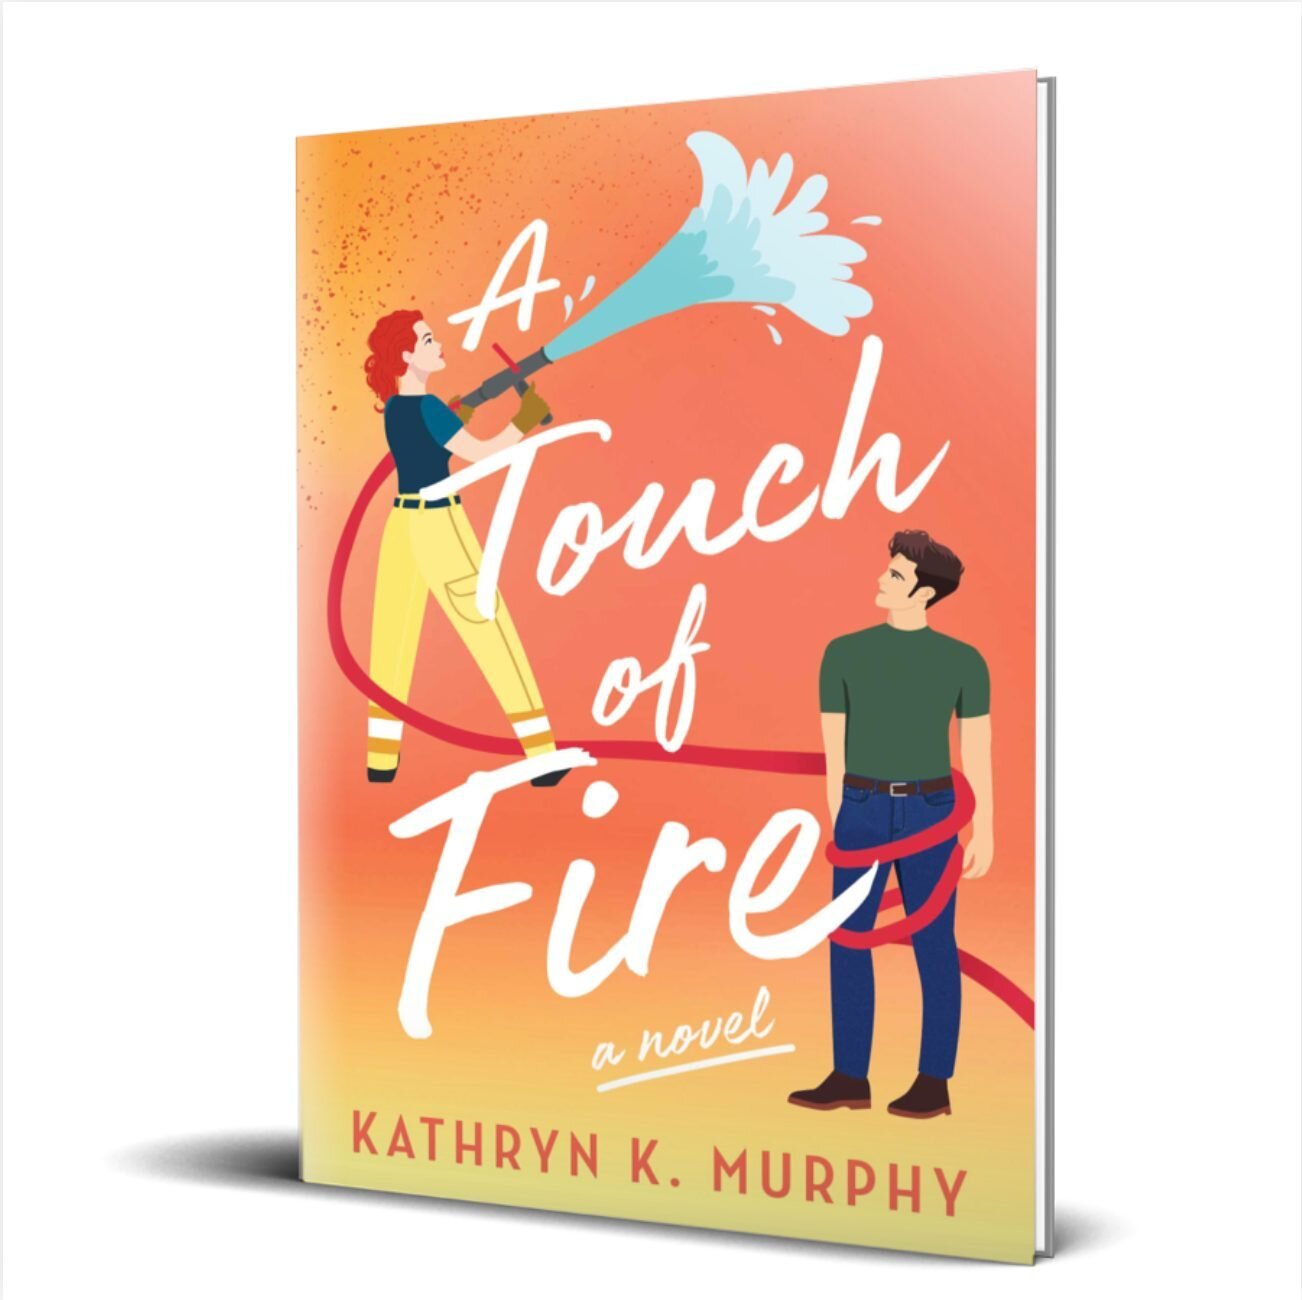 It's cover reveal day! A Touch of Fire coming this June! 🧡 #coverreveal #bookreview #kindleunlimited #bookaddict #chicklit #goodreads #chicklitreads #bookish #kindle #romance #booknerd #chicklitauthor #bookstagram #authorsofinstagram #contemporaryro